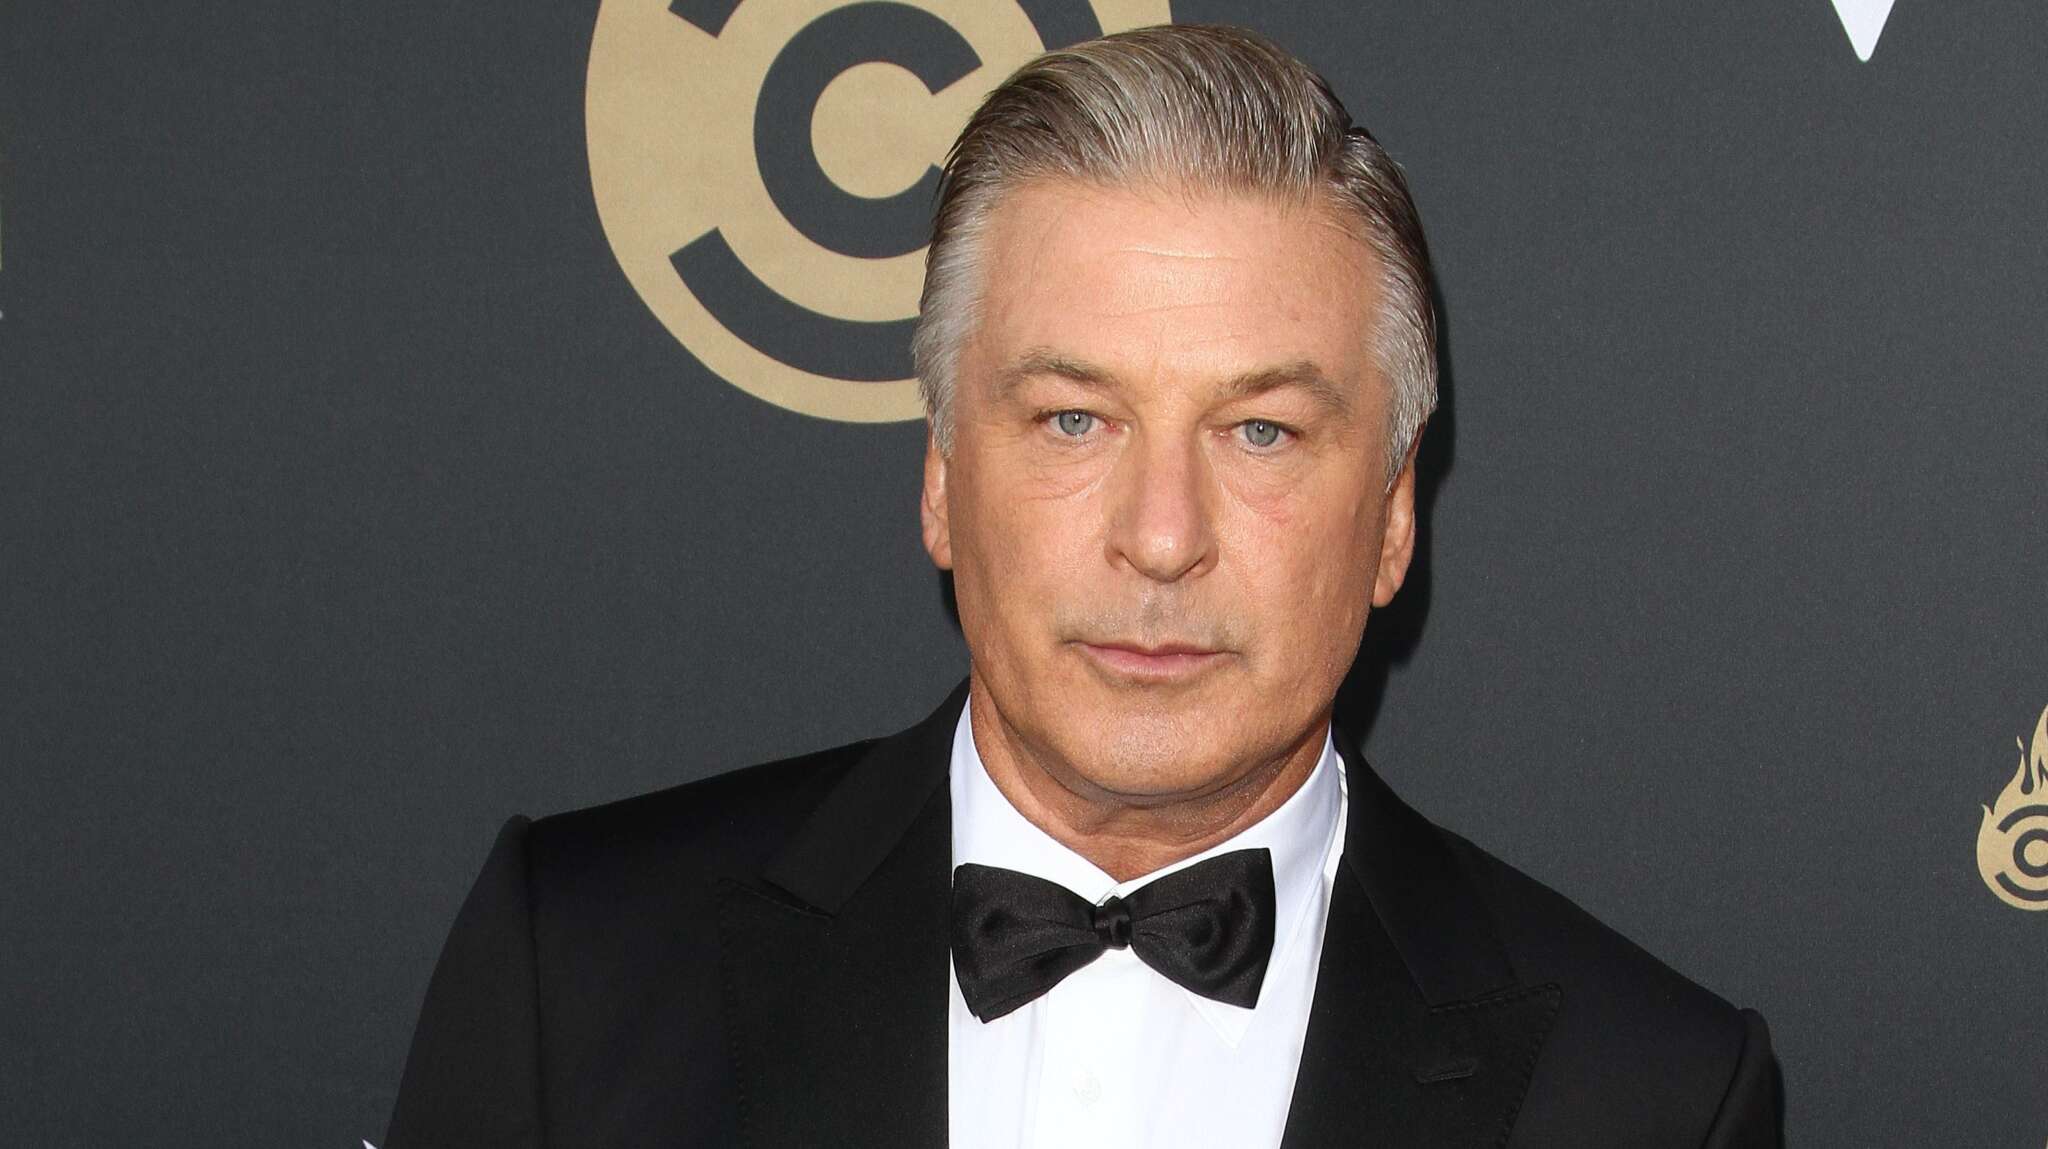 Alec Baldwin Claps Back At Critics After He And Hilaria Welcome A New Baby – ‘STFU!’